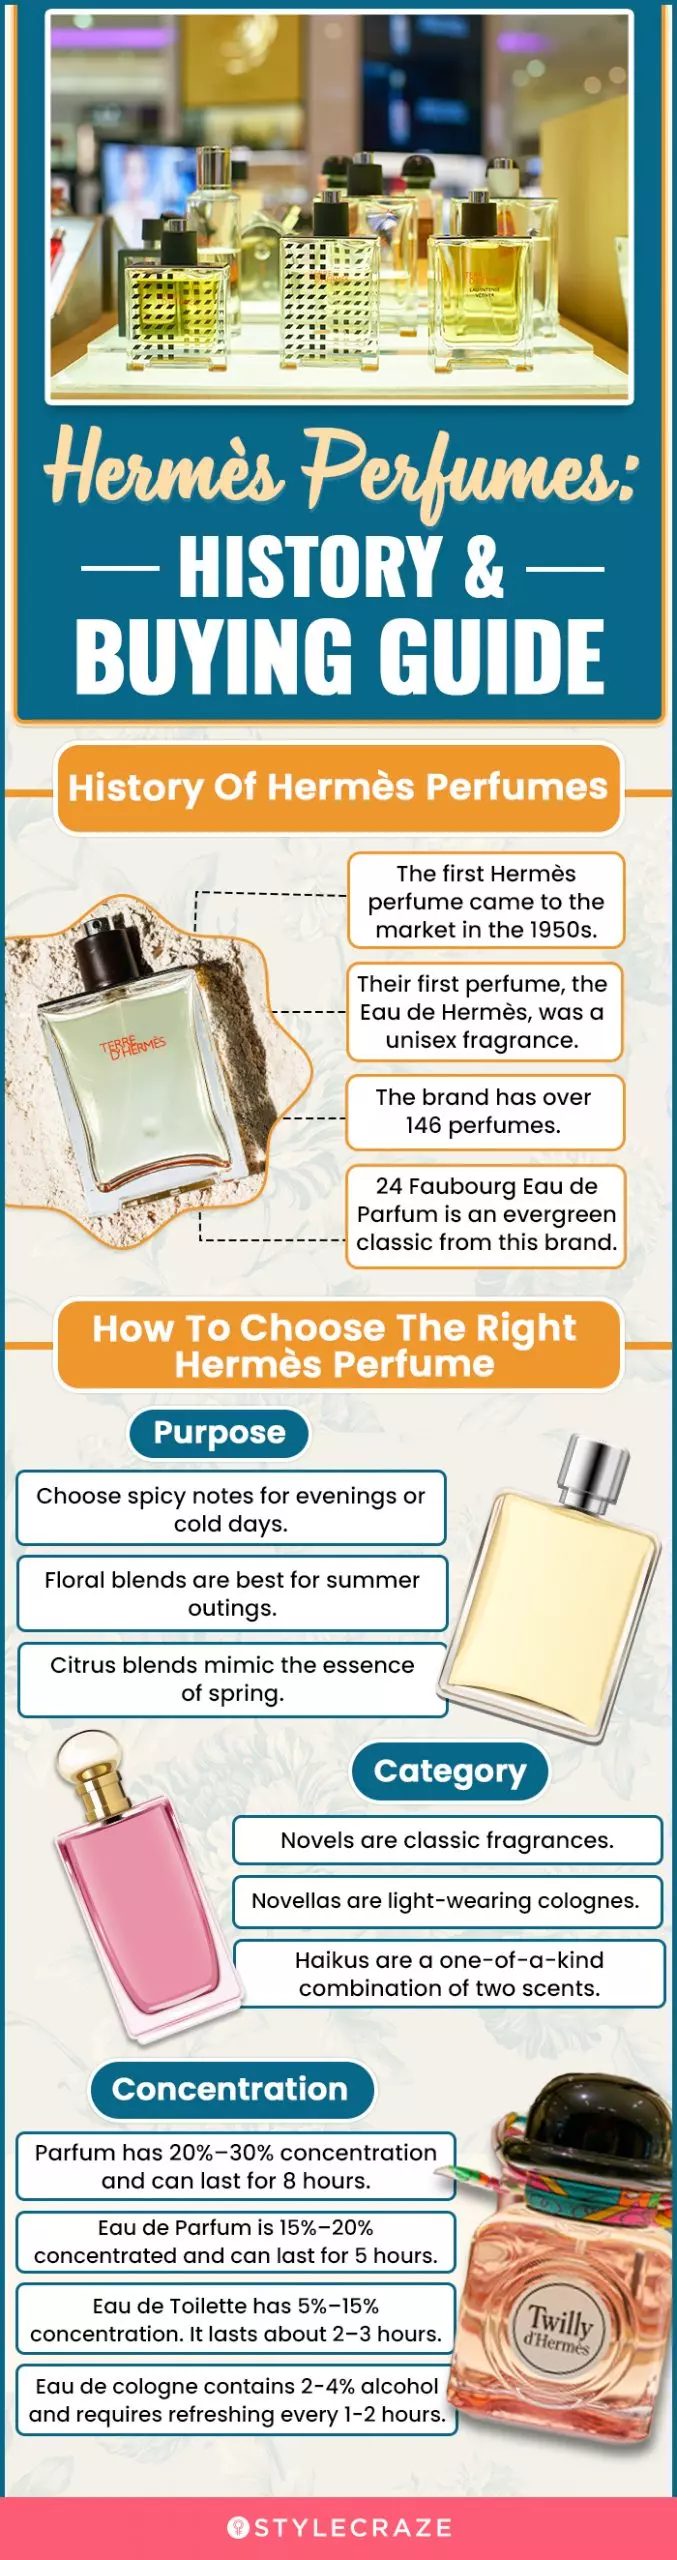 Hermès Perfumes: History & Buying Guide (infographic)